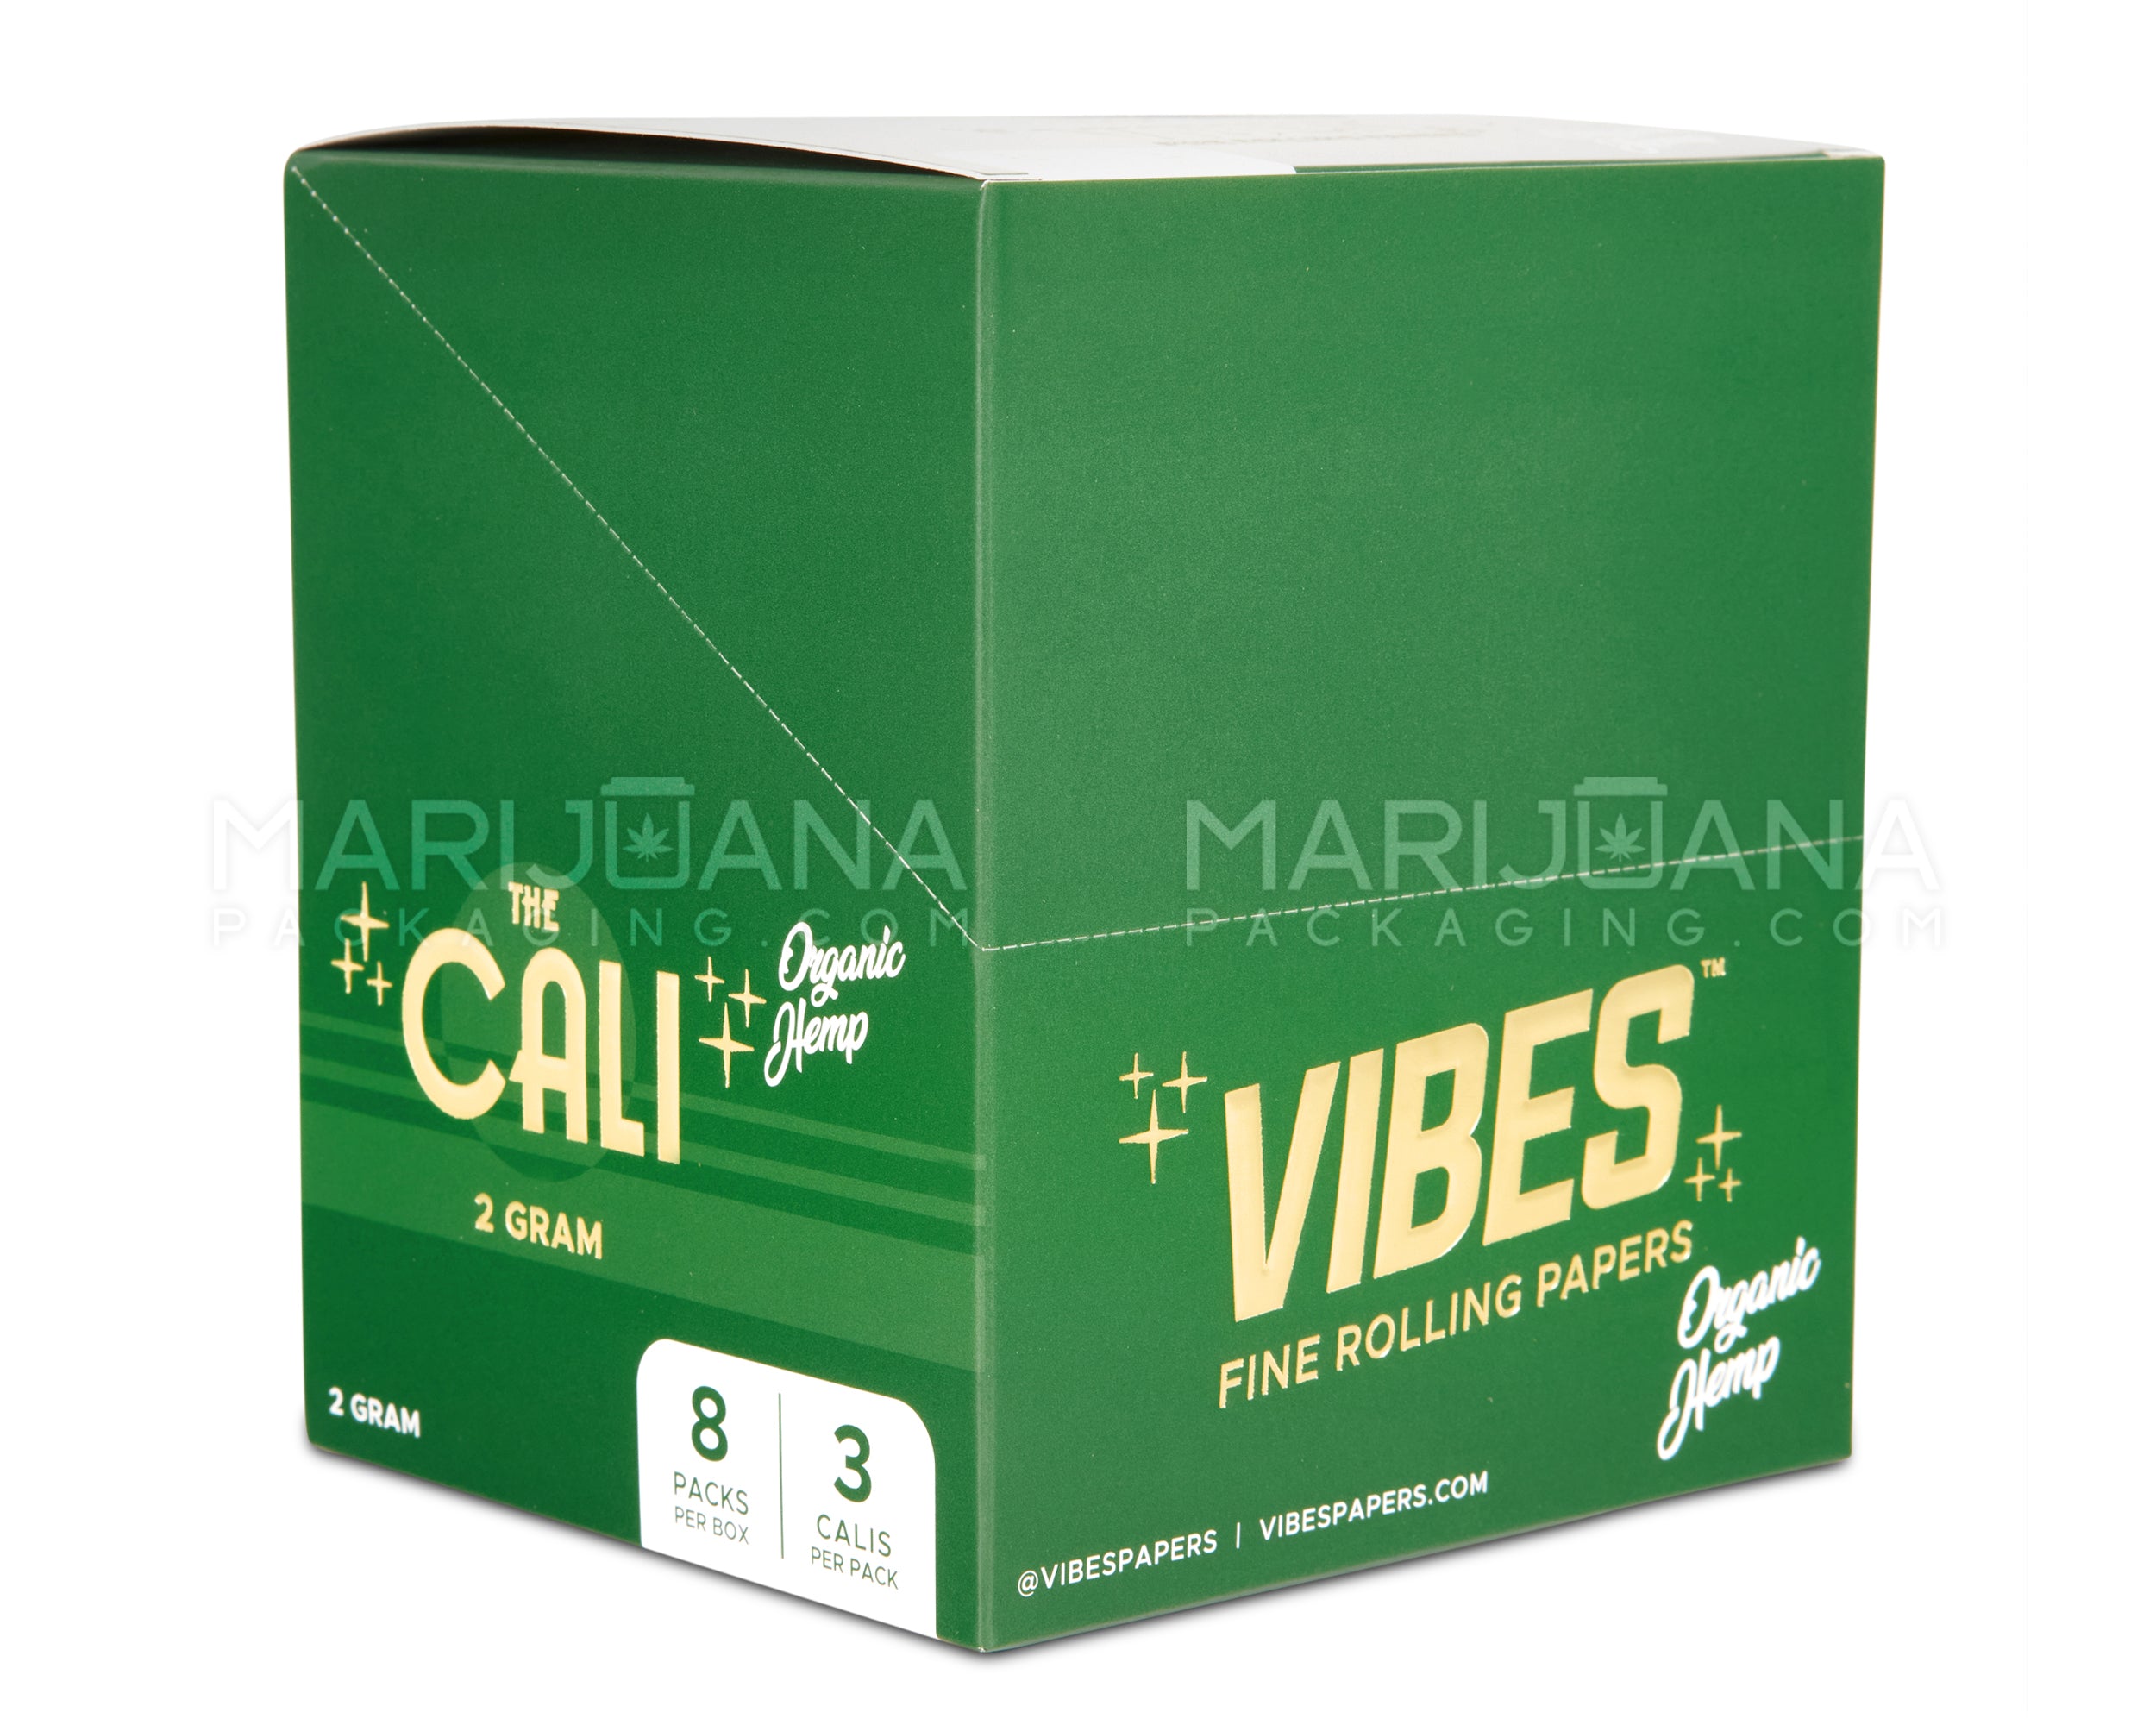 VIBES | 'Retail Display' The Cali 2 Gram Organic Pre-Rolled Cones | 110mm - Hemp Paper - 24 Count - 5